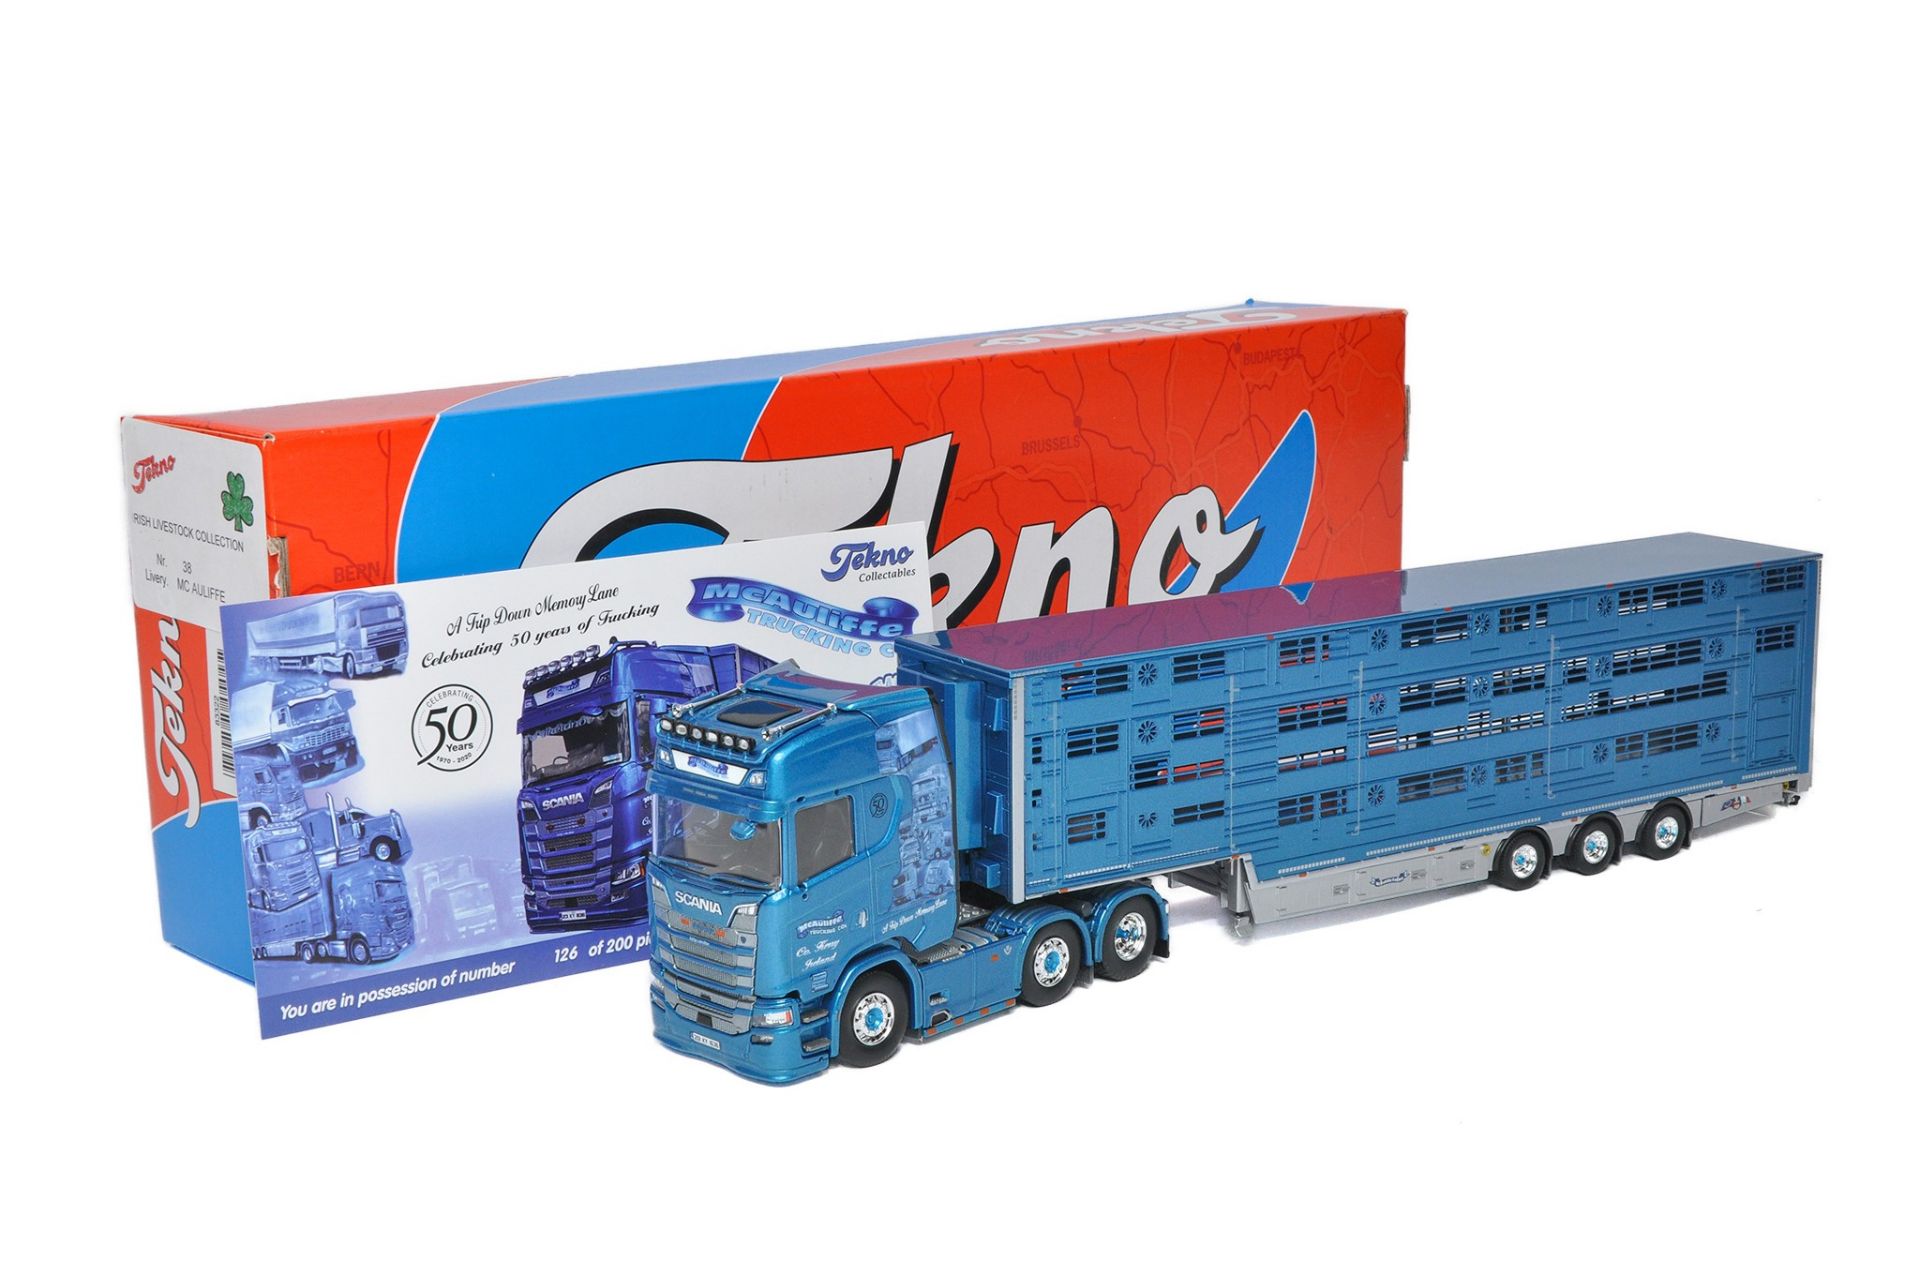 Tekno 1/50 diecast model truck issue comprising Scania Livestock Trailer in the livery of Mcaulife